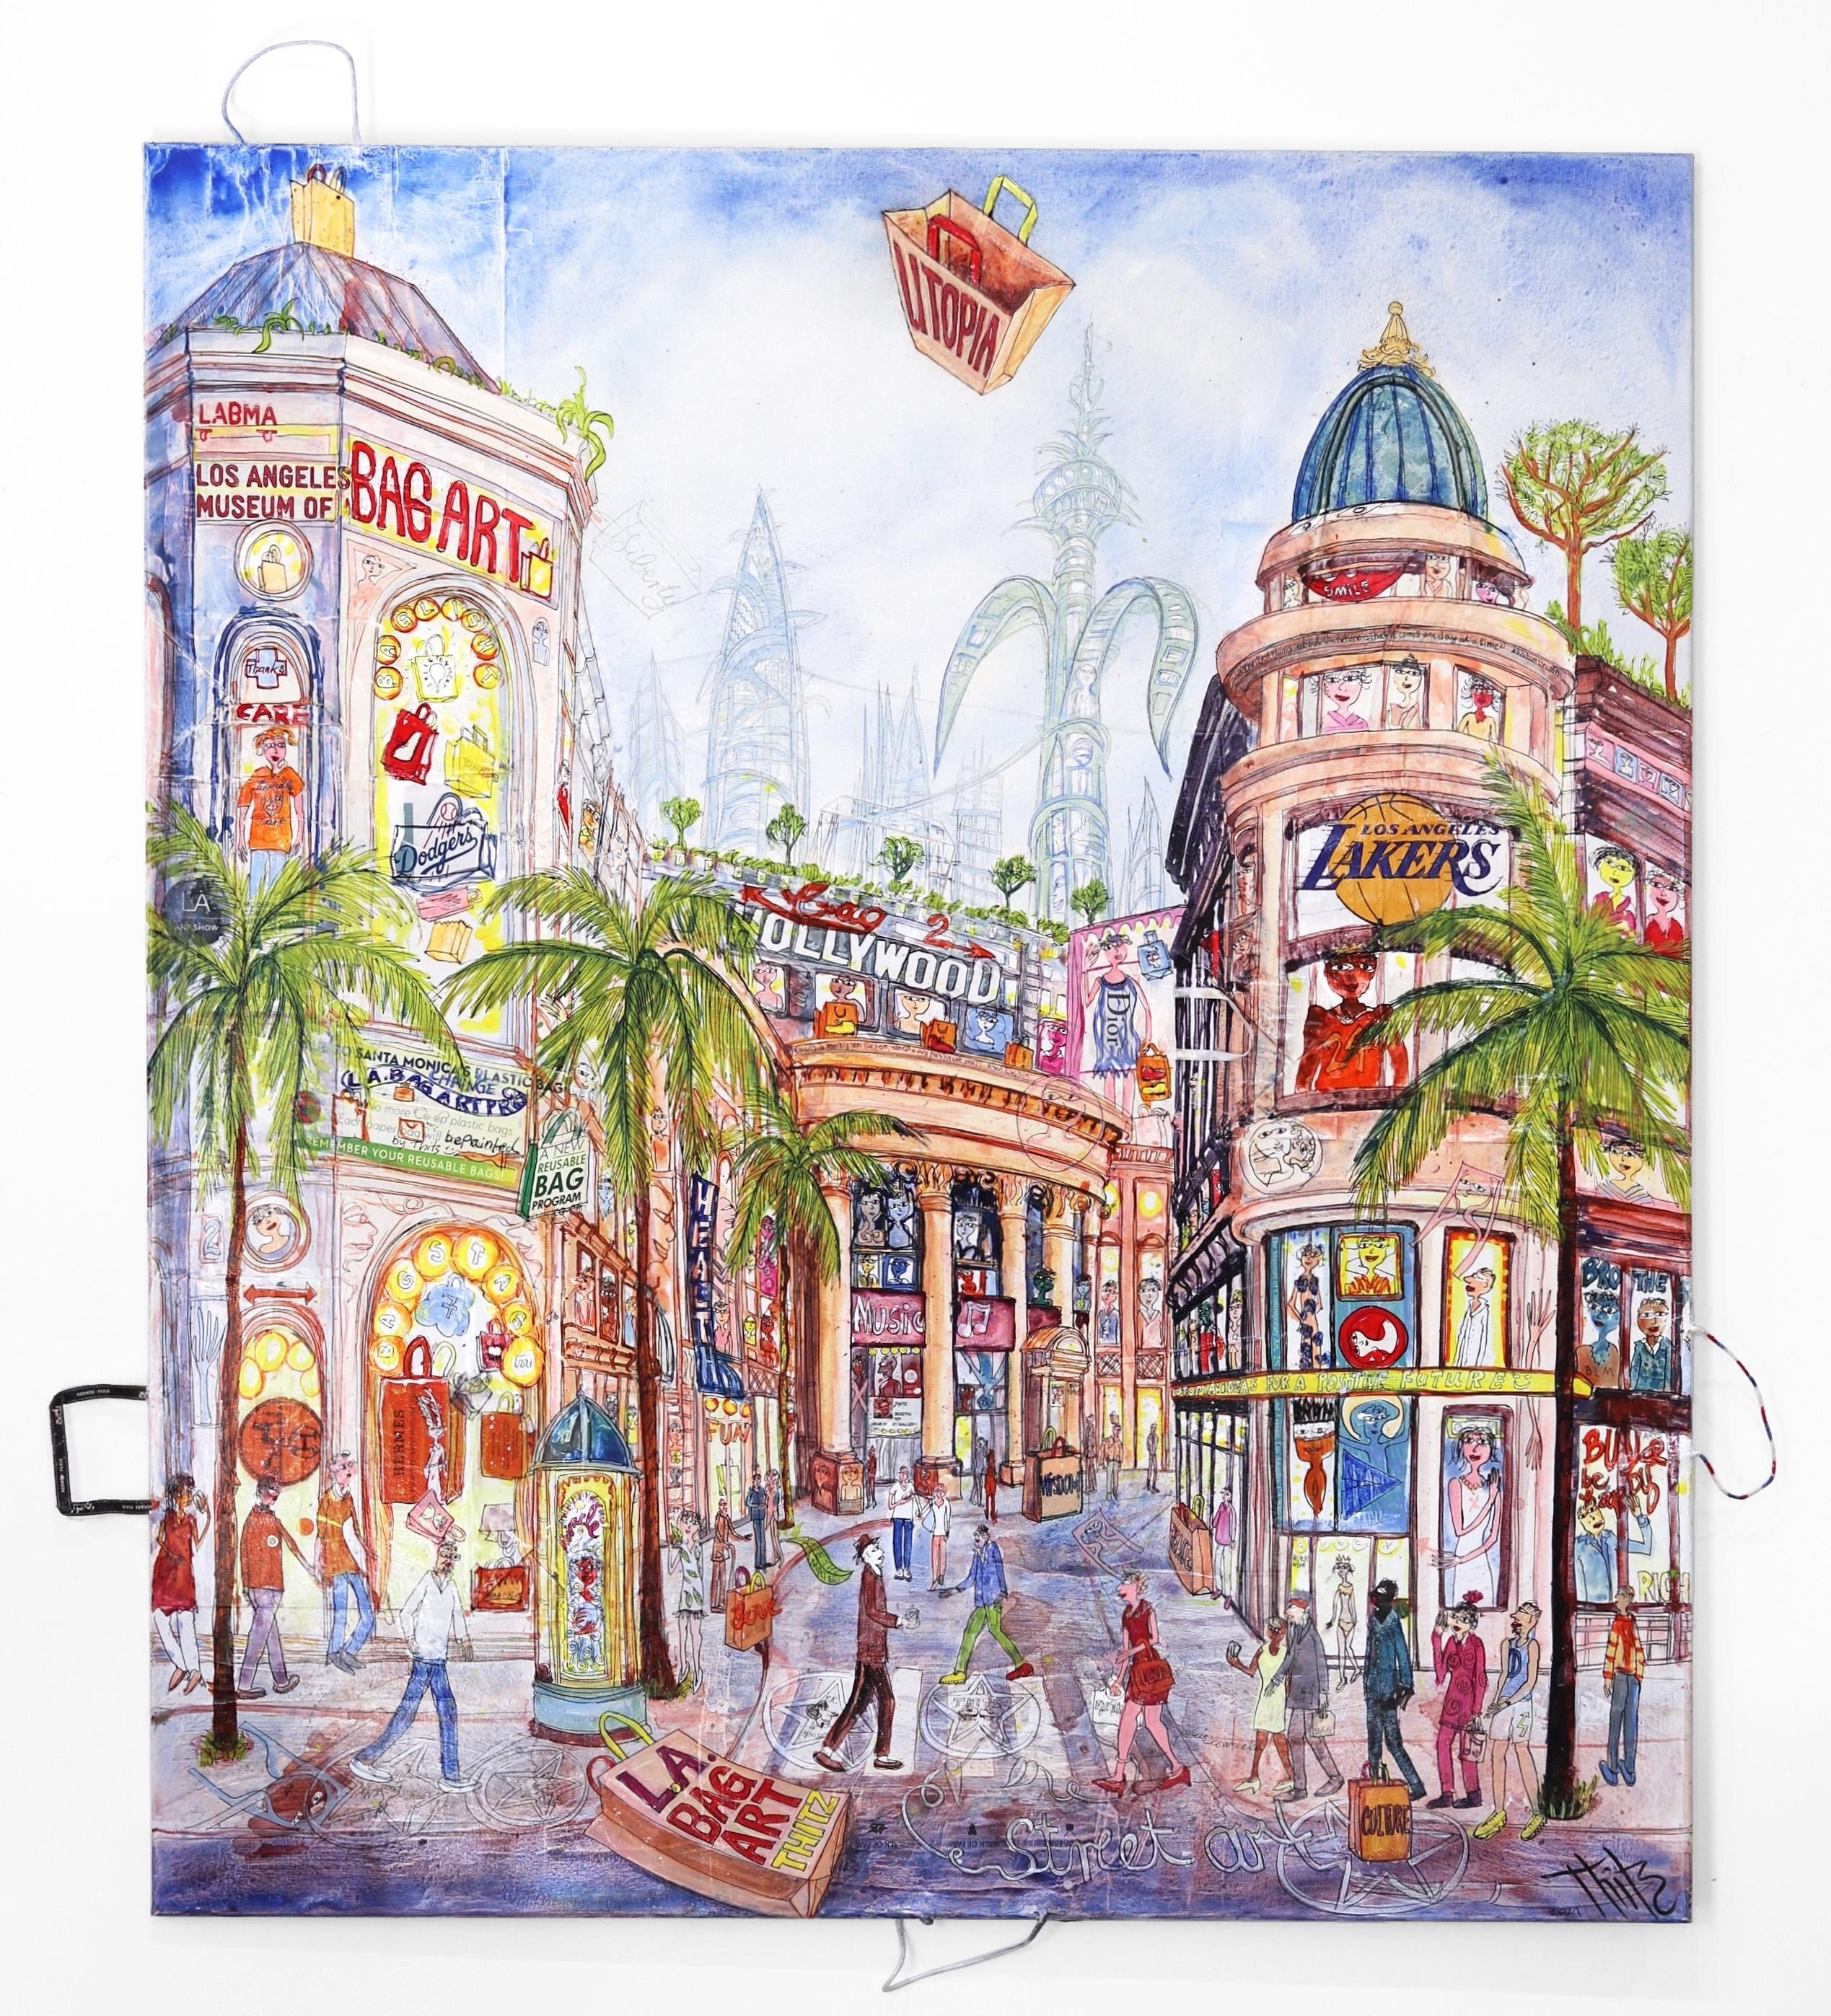 LA Bag Art Rodeo Drive - Large Colorful Oversized Original Cityscape Painting - Mixed Media Art by Thitz